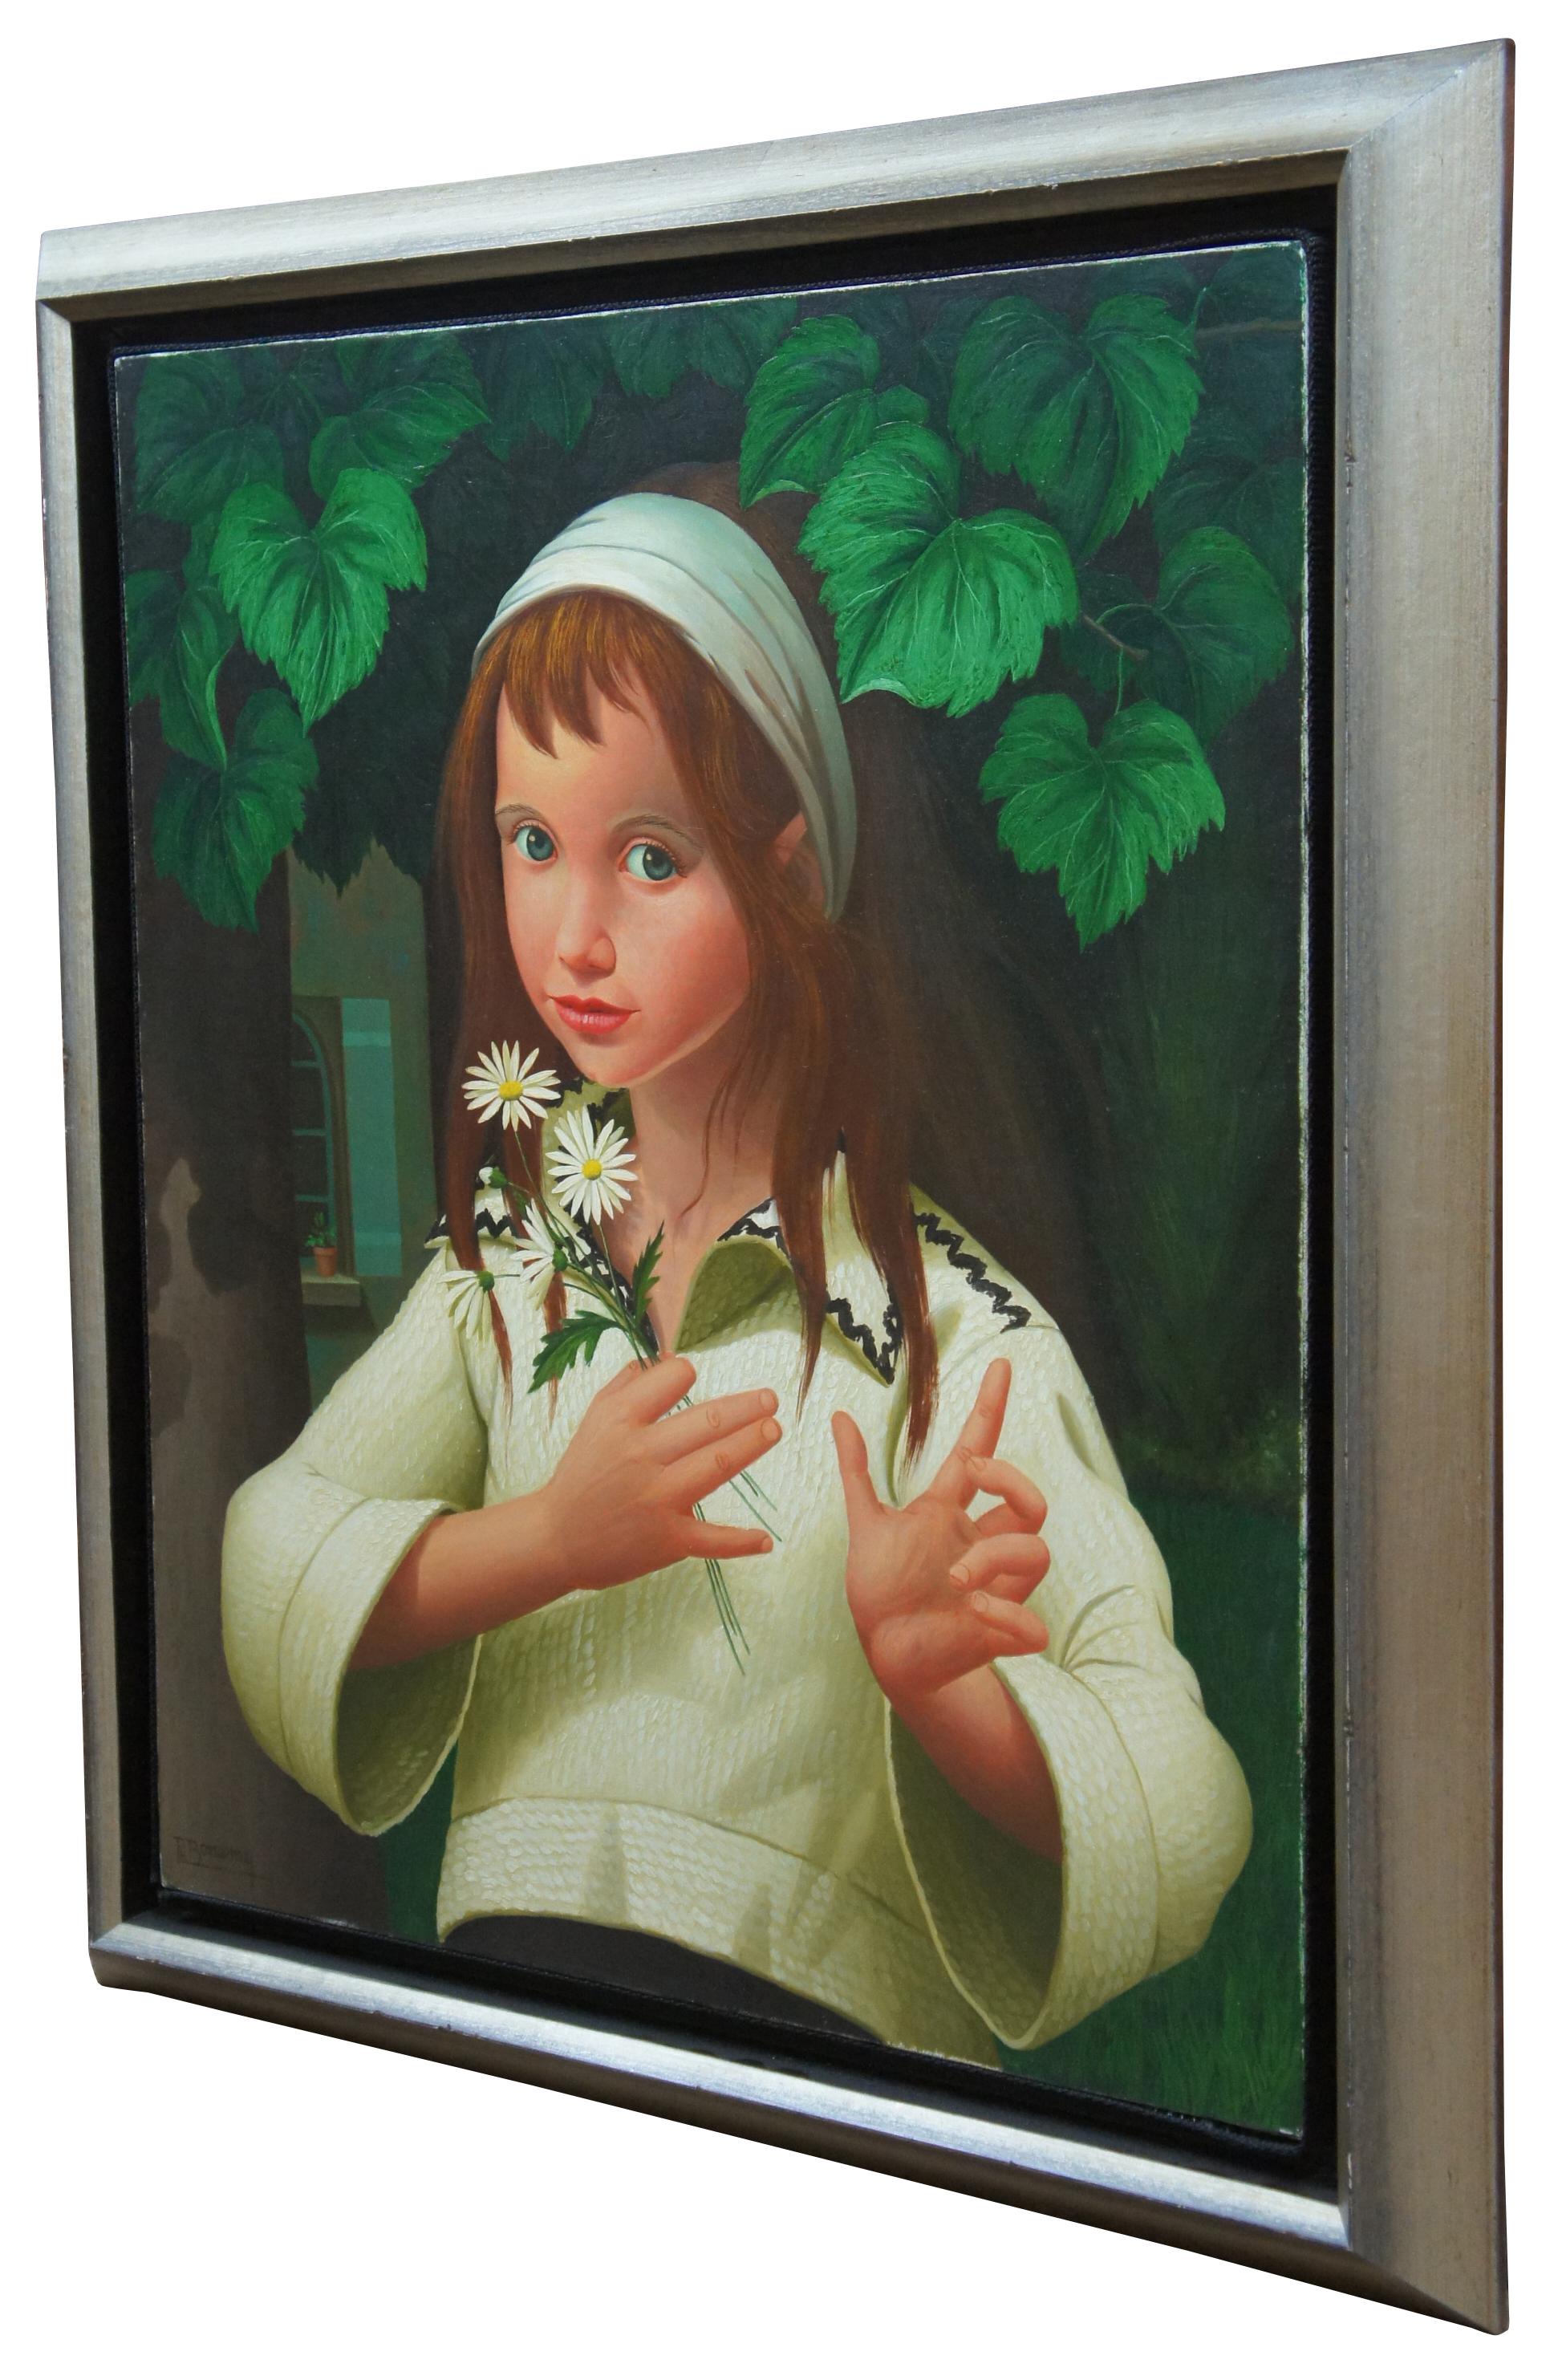 Original oil on canvas portrait by Philippe Bonamy of a girl with light brown hair, wearing a white shirt and headband, holding daisies. / Philippe Bonamy (b. 1926) is an active artist living in France. Signed lower left.
  
Sans Frame - 21.25” x